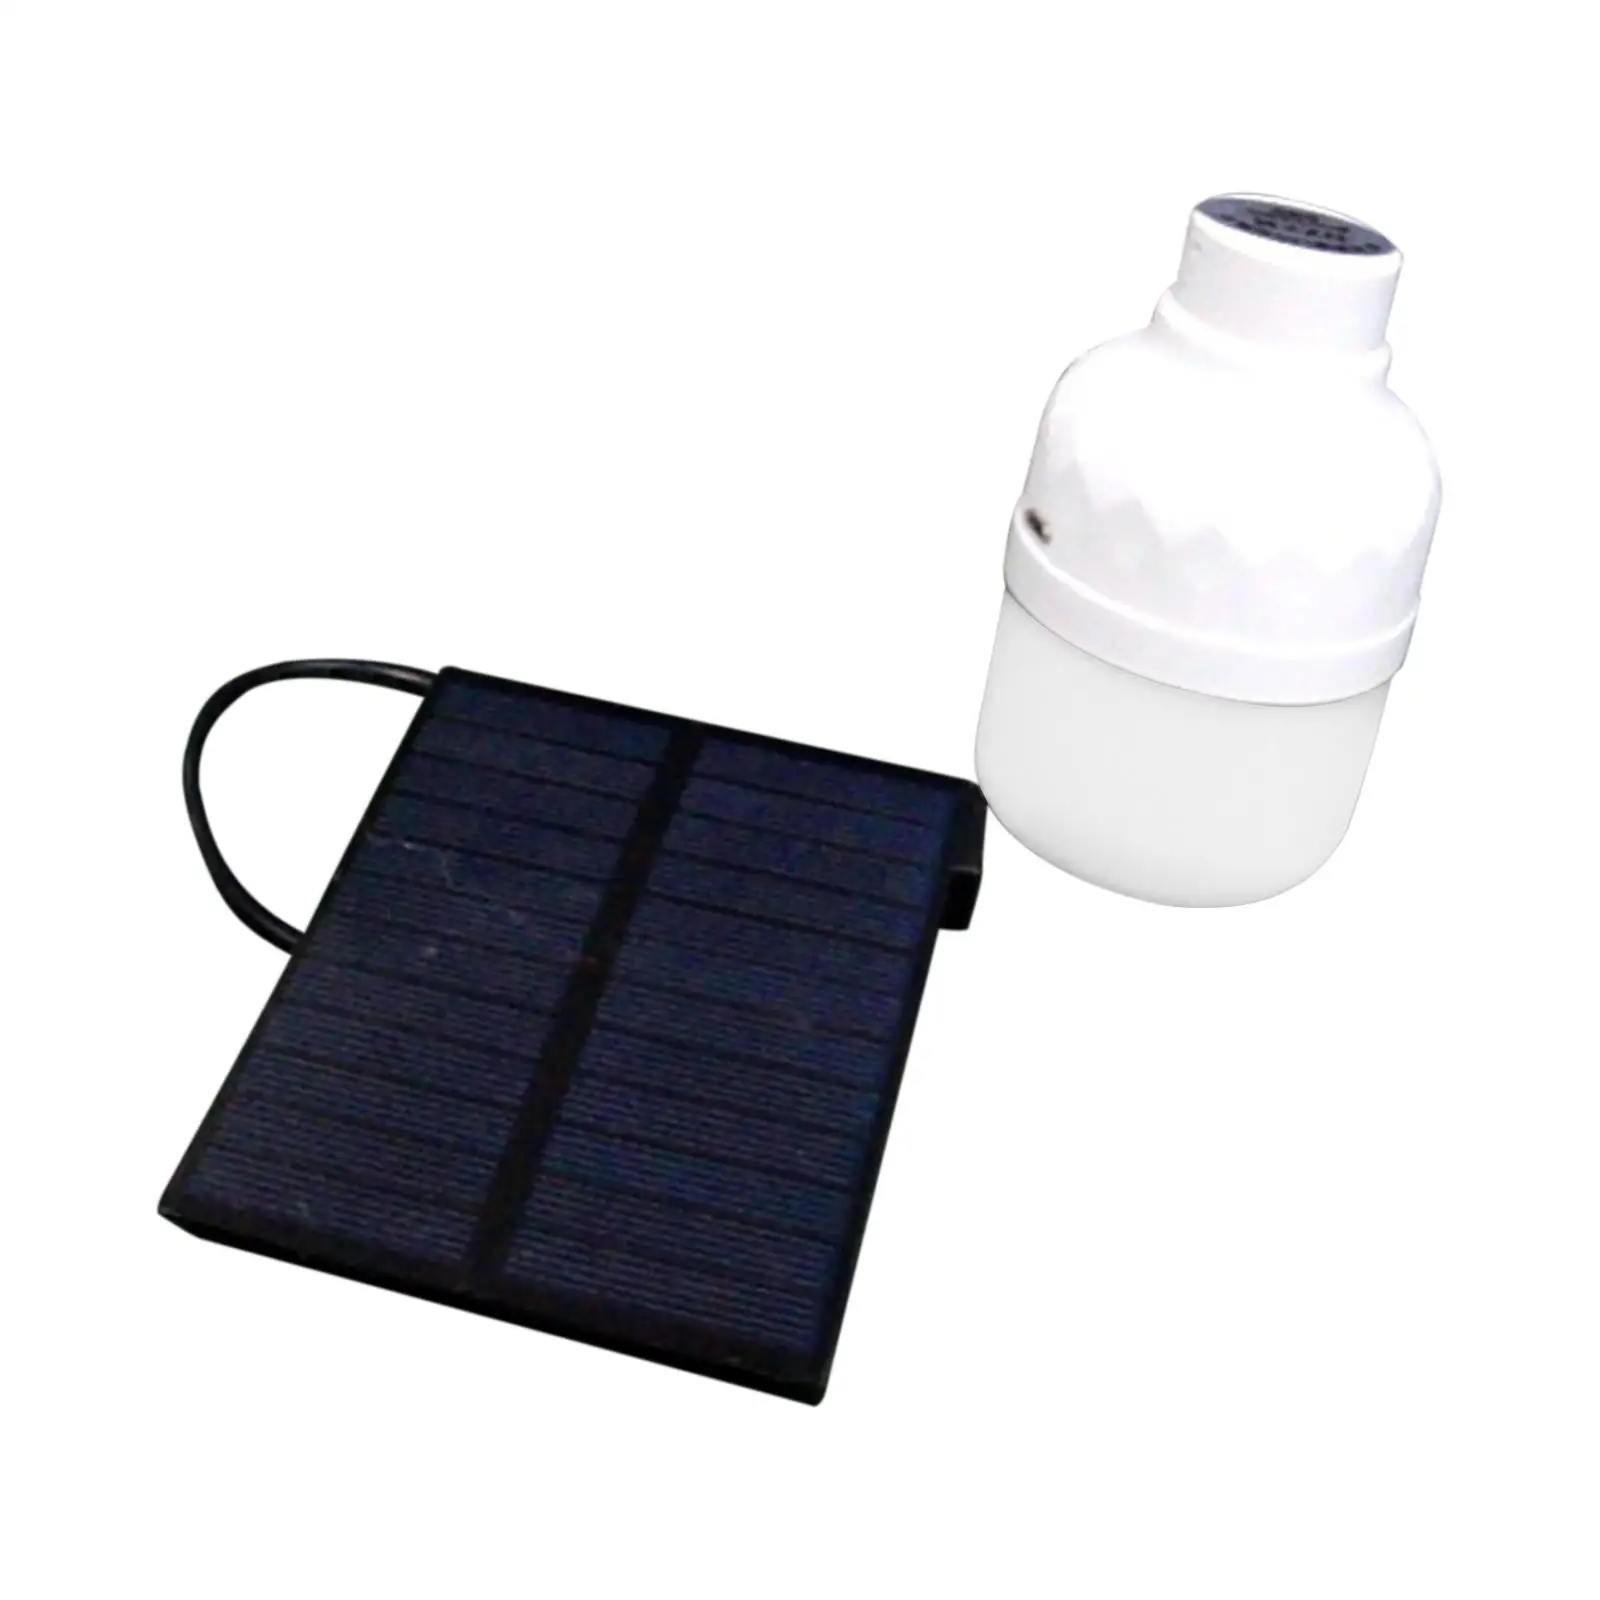 LED Bulb Light Solar Powered Panel Camping Lighting USB Rechargeable for Yard Tent Backpacking